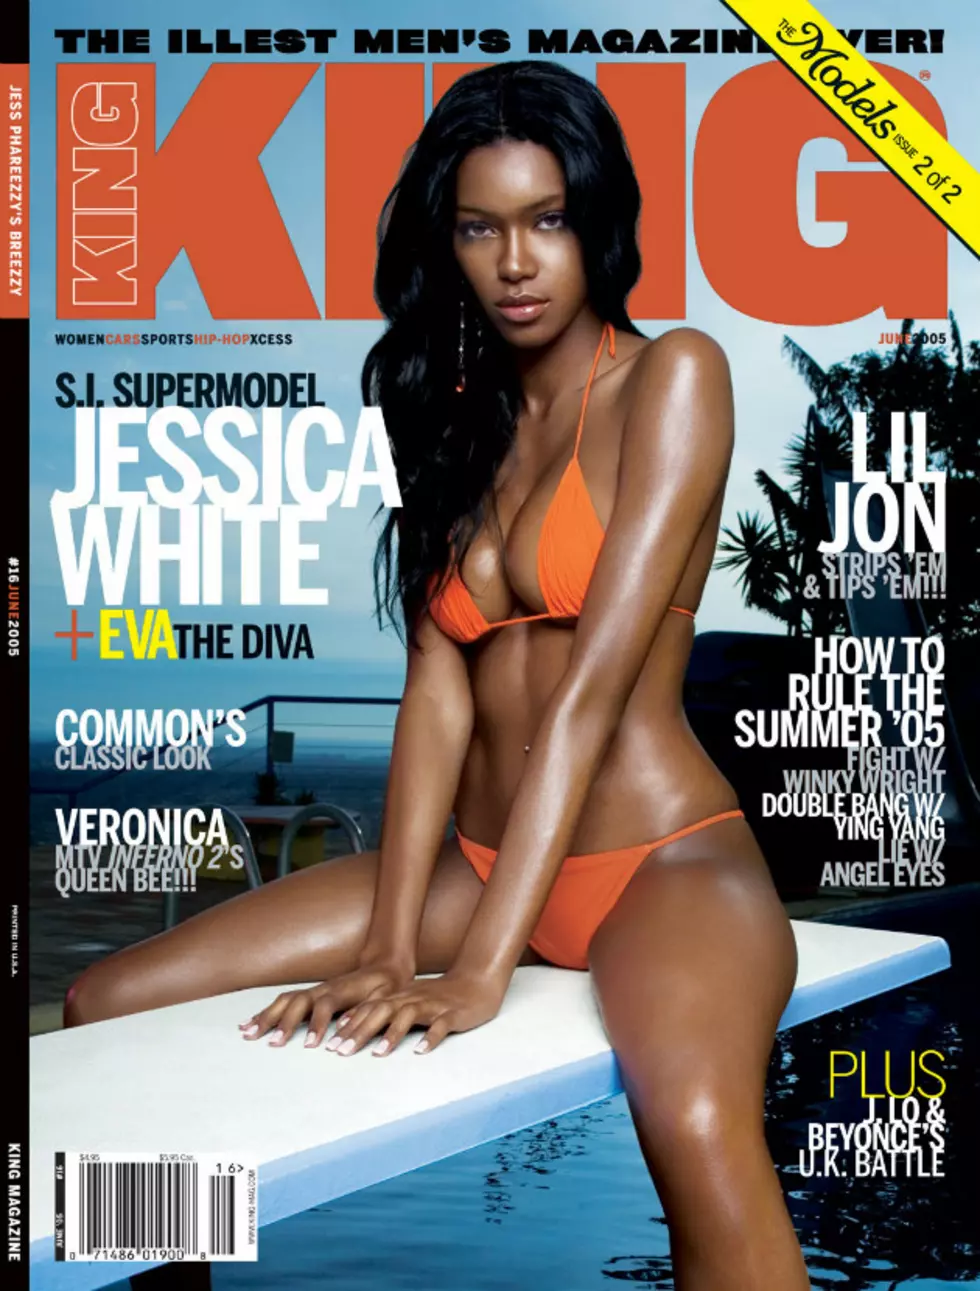 Throwback Thursday: Jessica White Spices Up the June 2005 Issue of KING Magazine